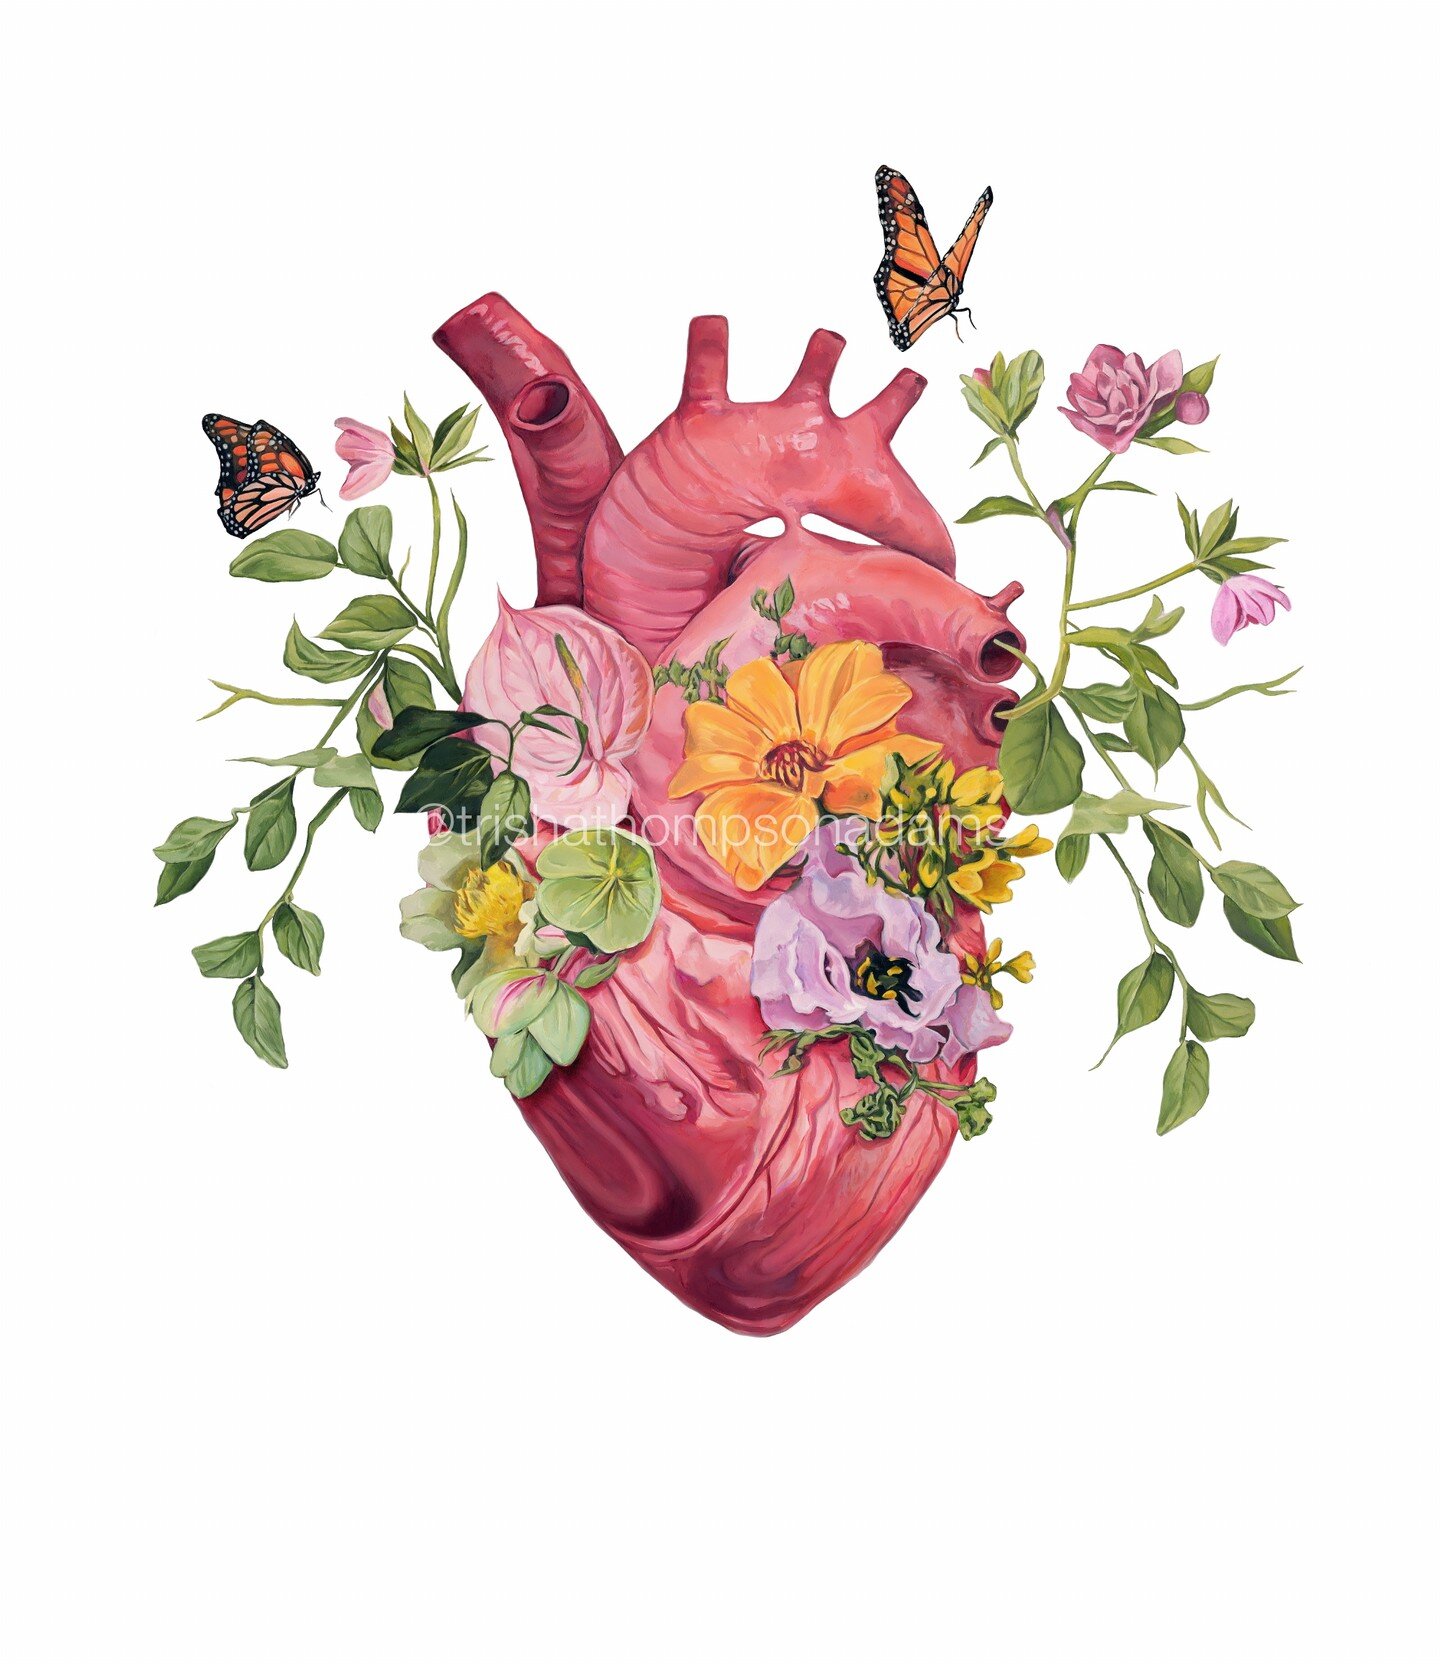 Flutter Heart with a white background ⚡ 15% off end of summer sale ends soon! 

#oilpainting #anatomicalheart #anatomy #anatomyart #heart #heartart #humananatomy #floralanatomy #flowers #beautifulbizarre